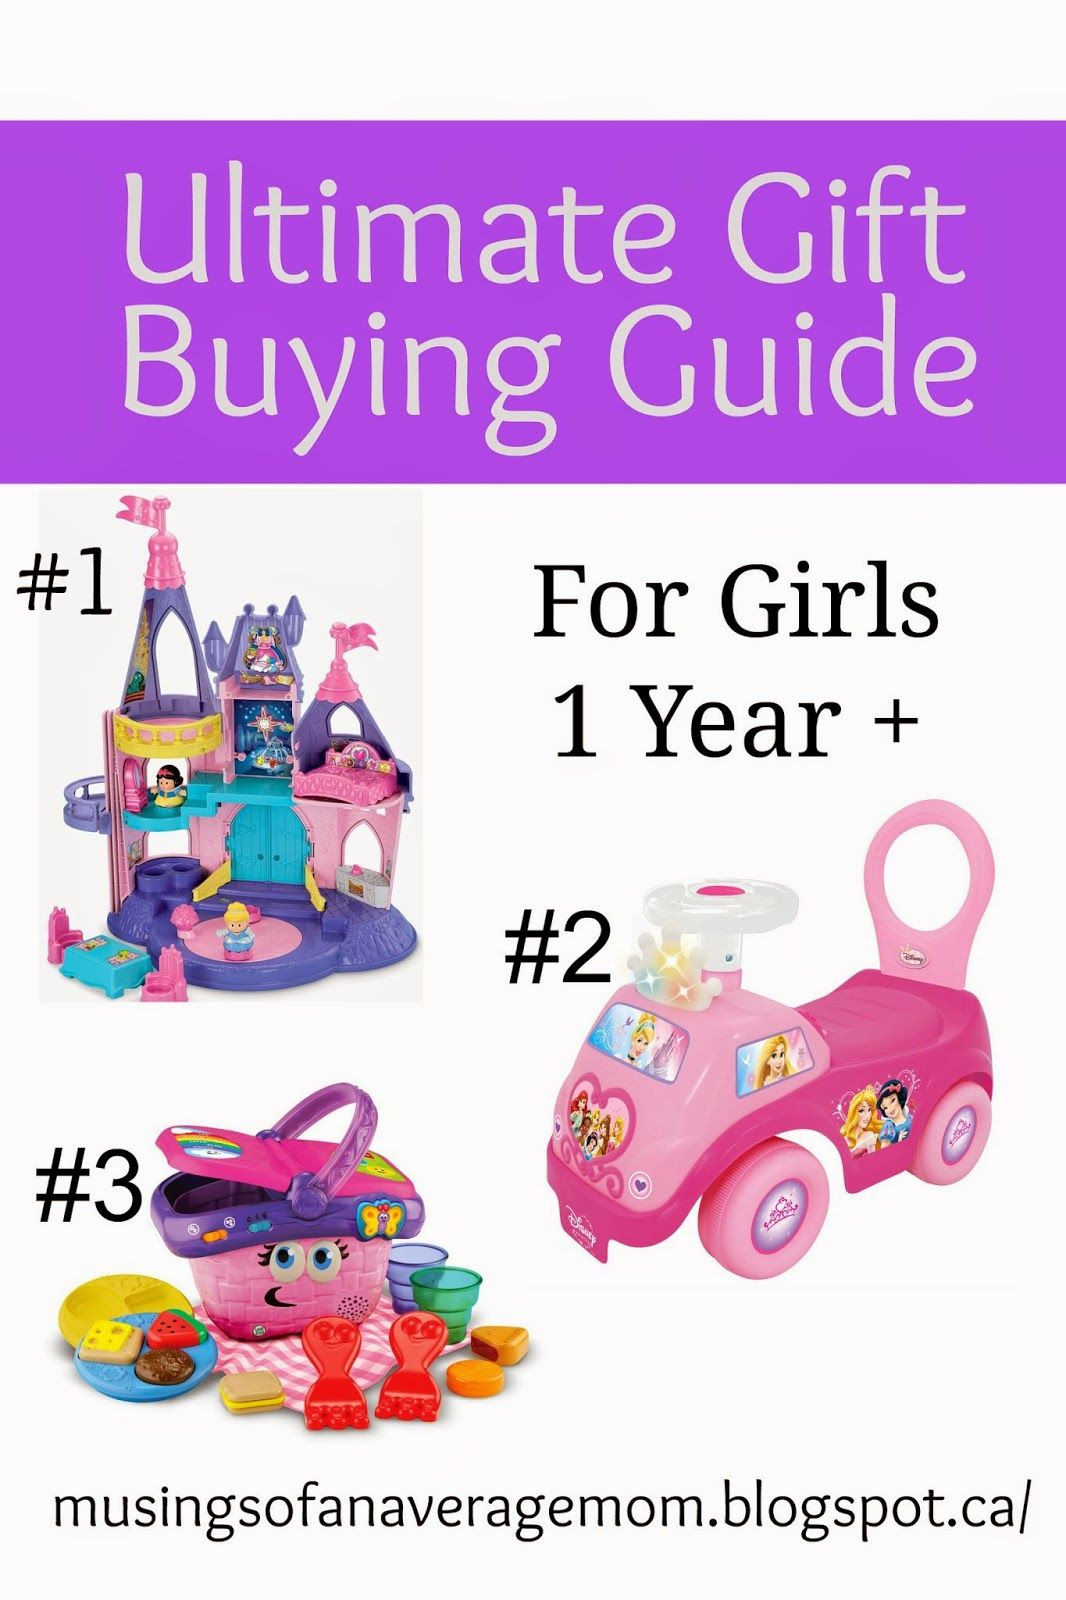 Gift Ideas For 1 Year Old Girls
 Ultimate Gift Buying Guide e Year Olds